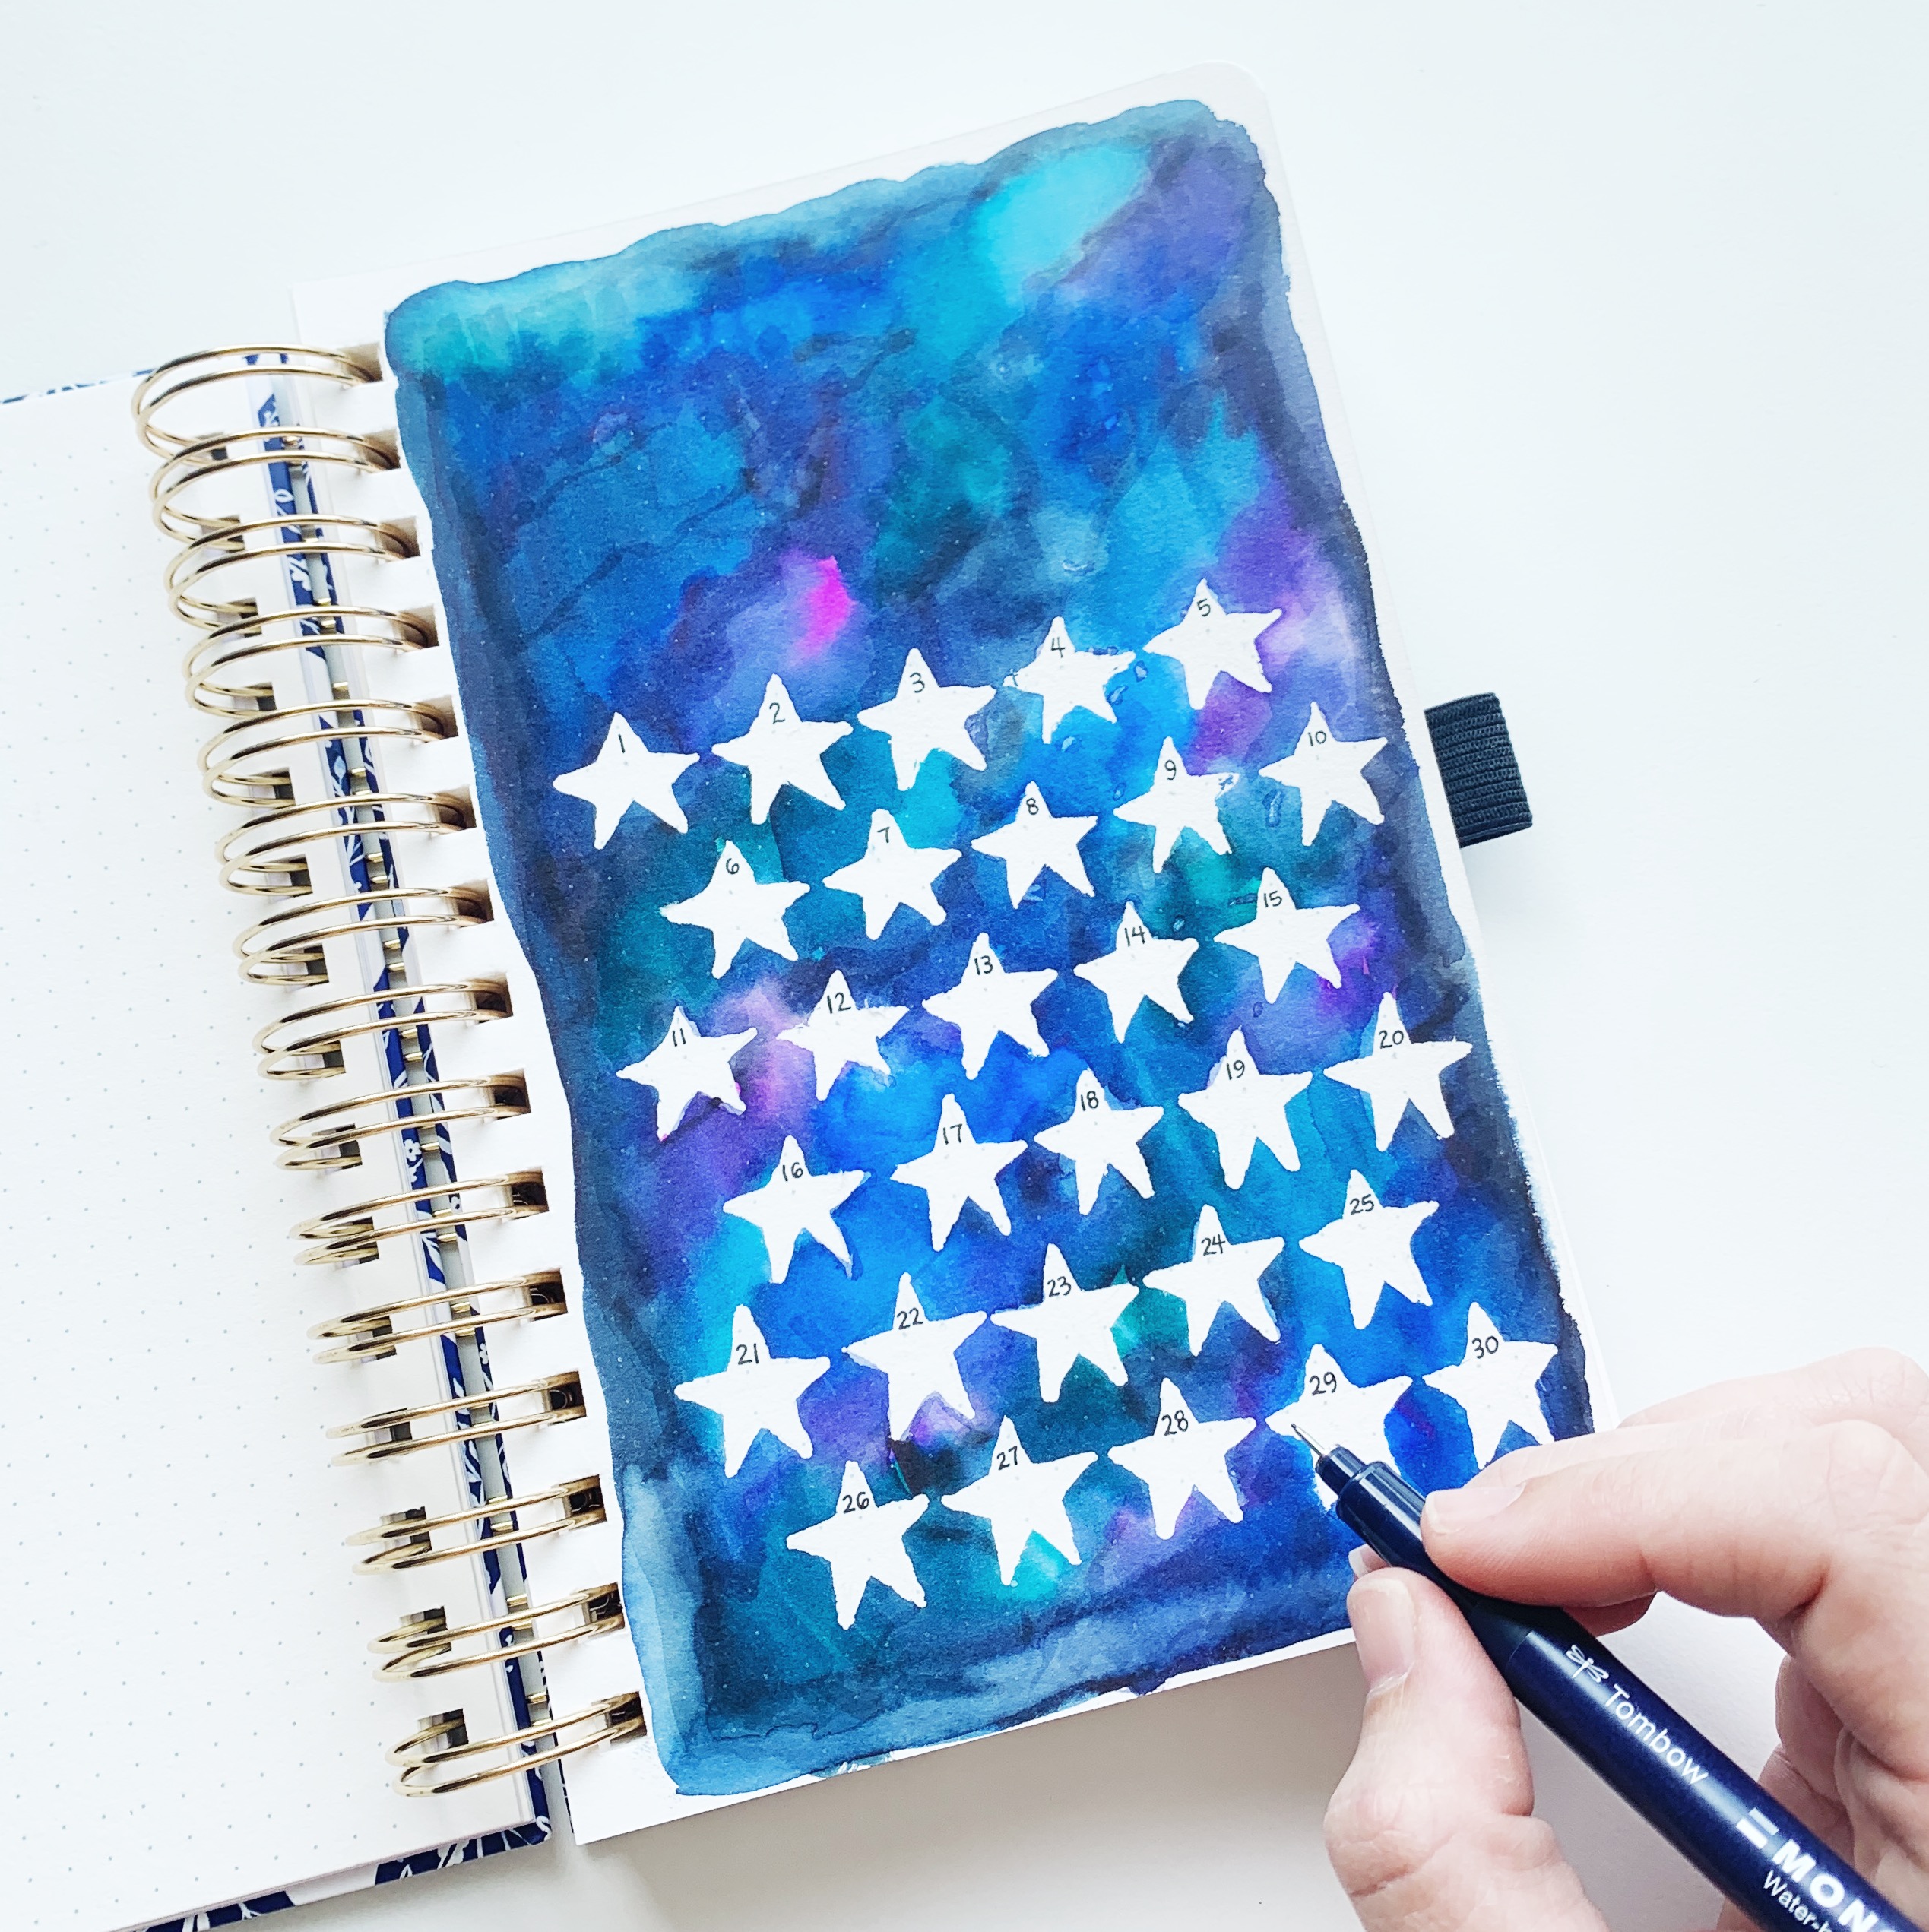 Learn how to make a horoscope watercolor habit tracker with Adrienne from @studio80design!